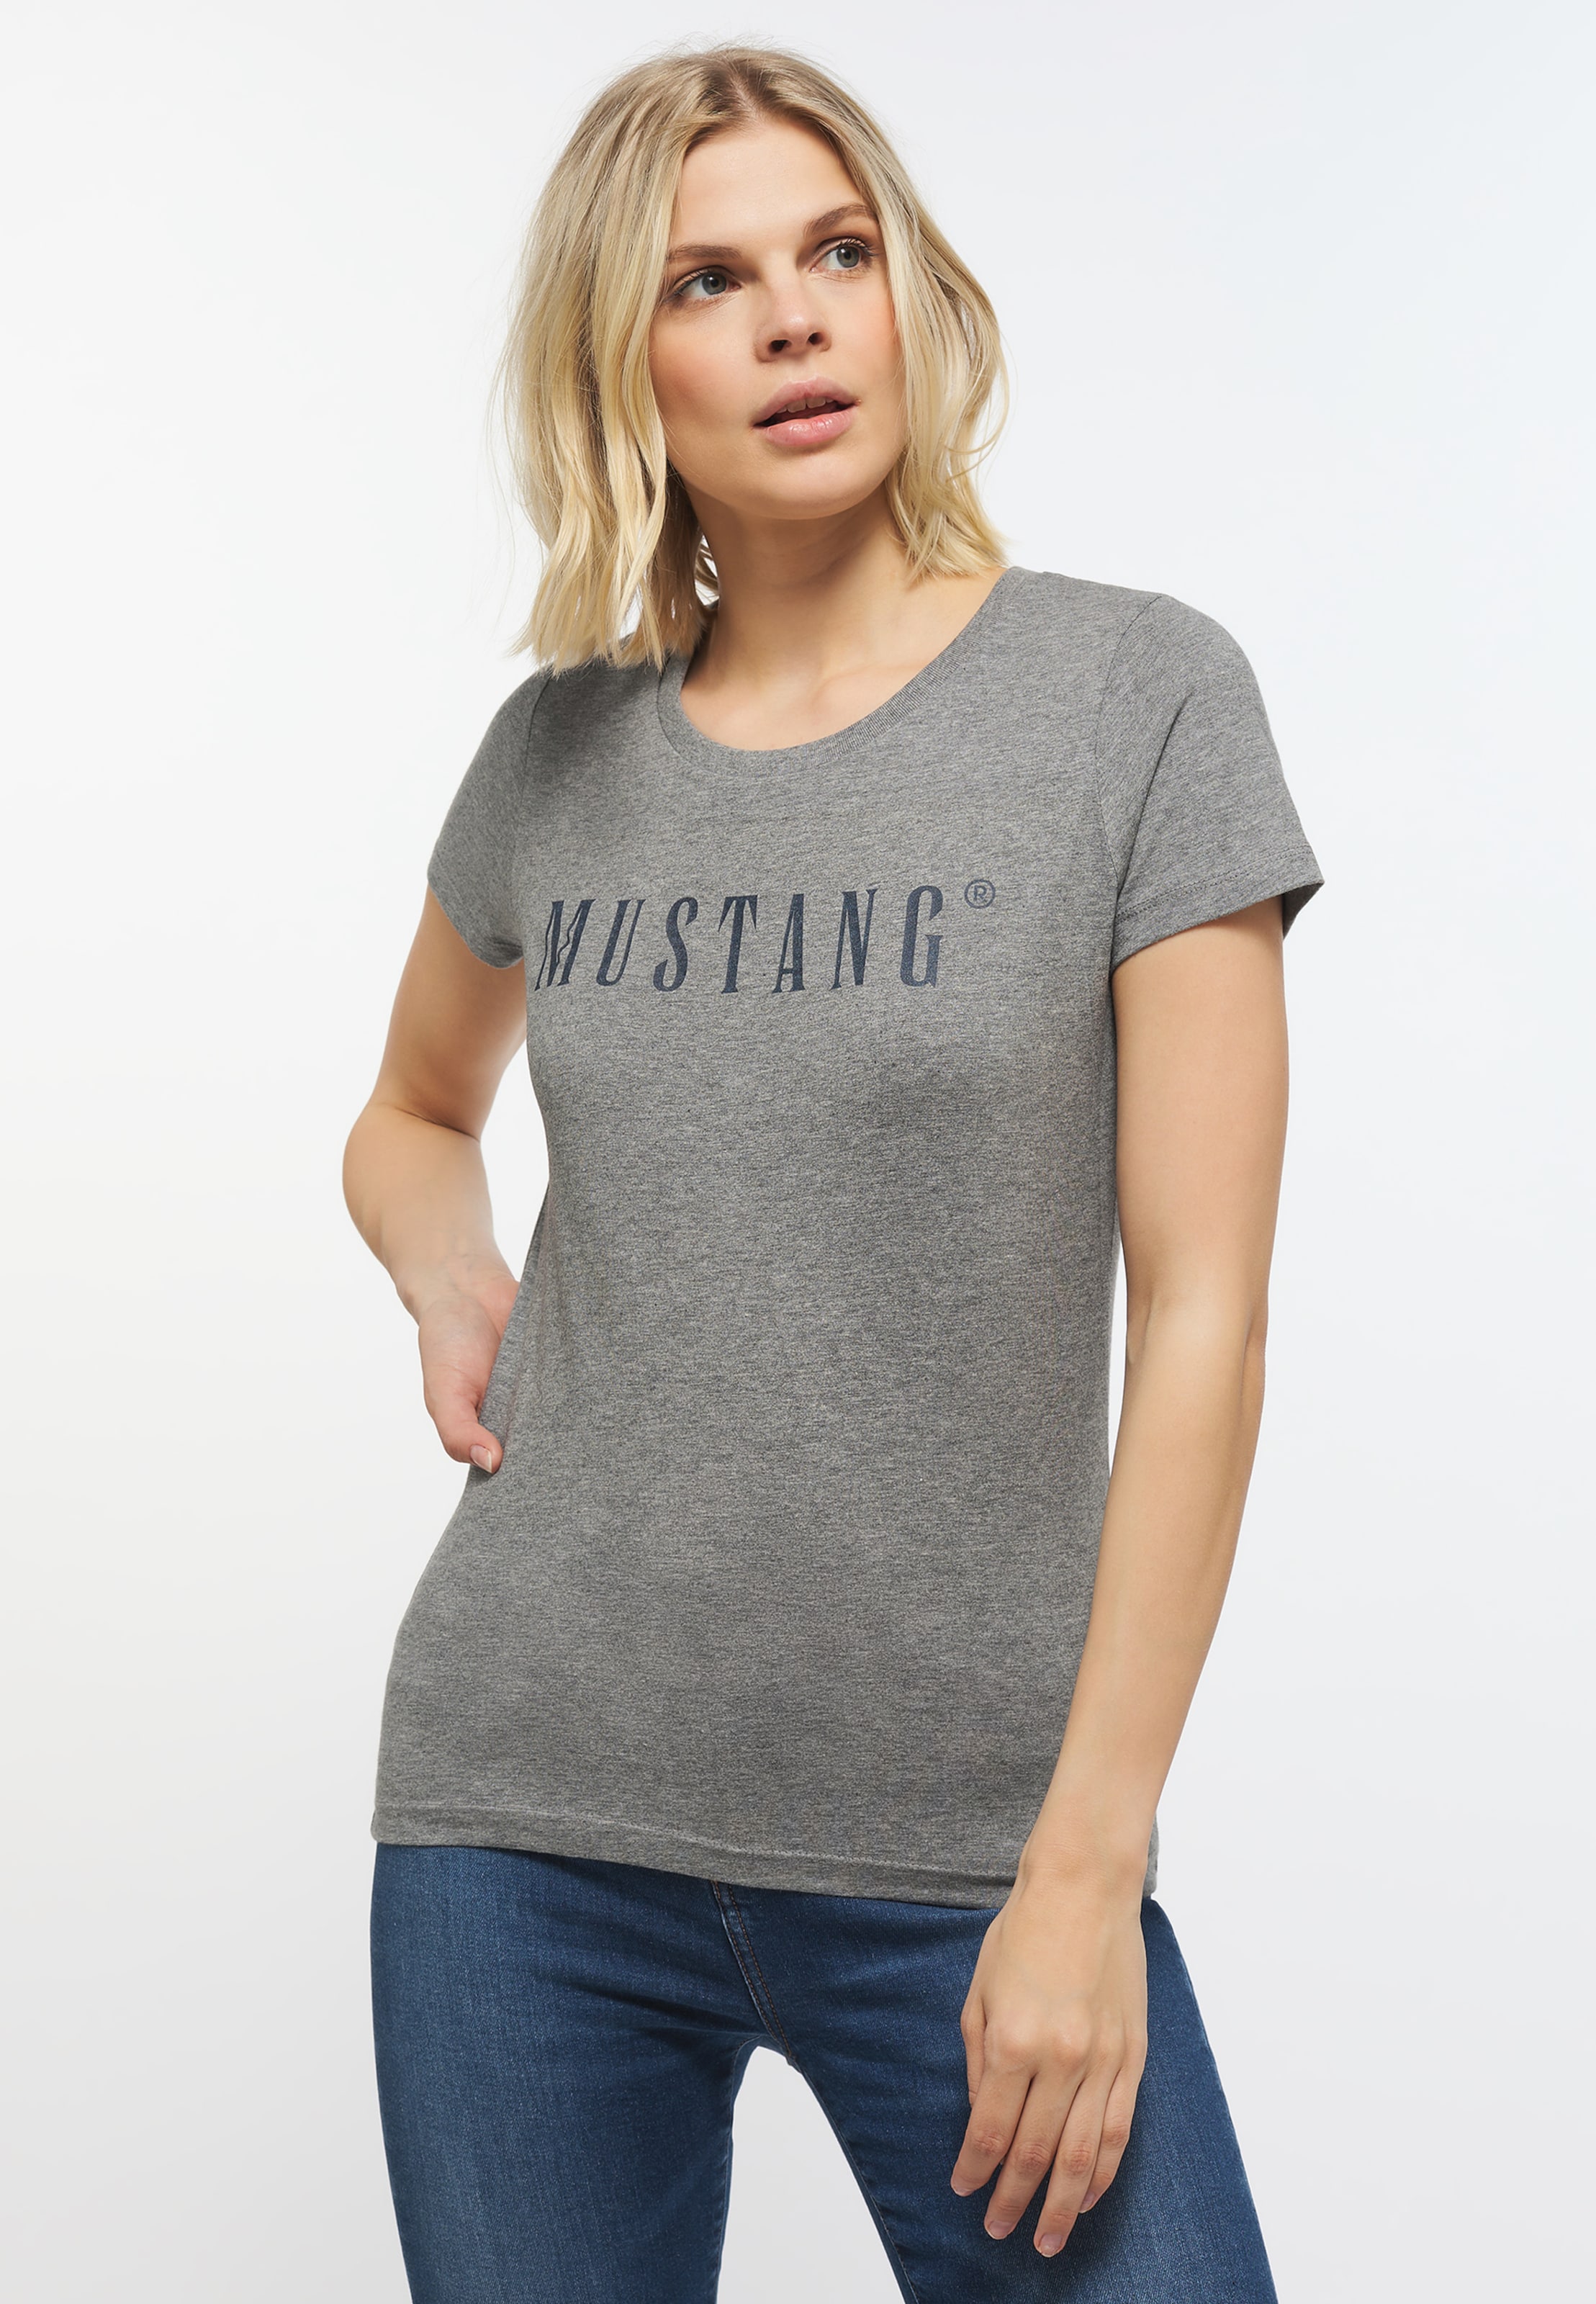 T-Shirt ABOUT YOU Dunkelgrau, Graumeliert in MUSTANG |